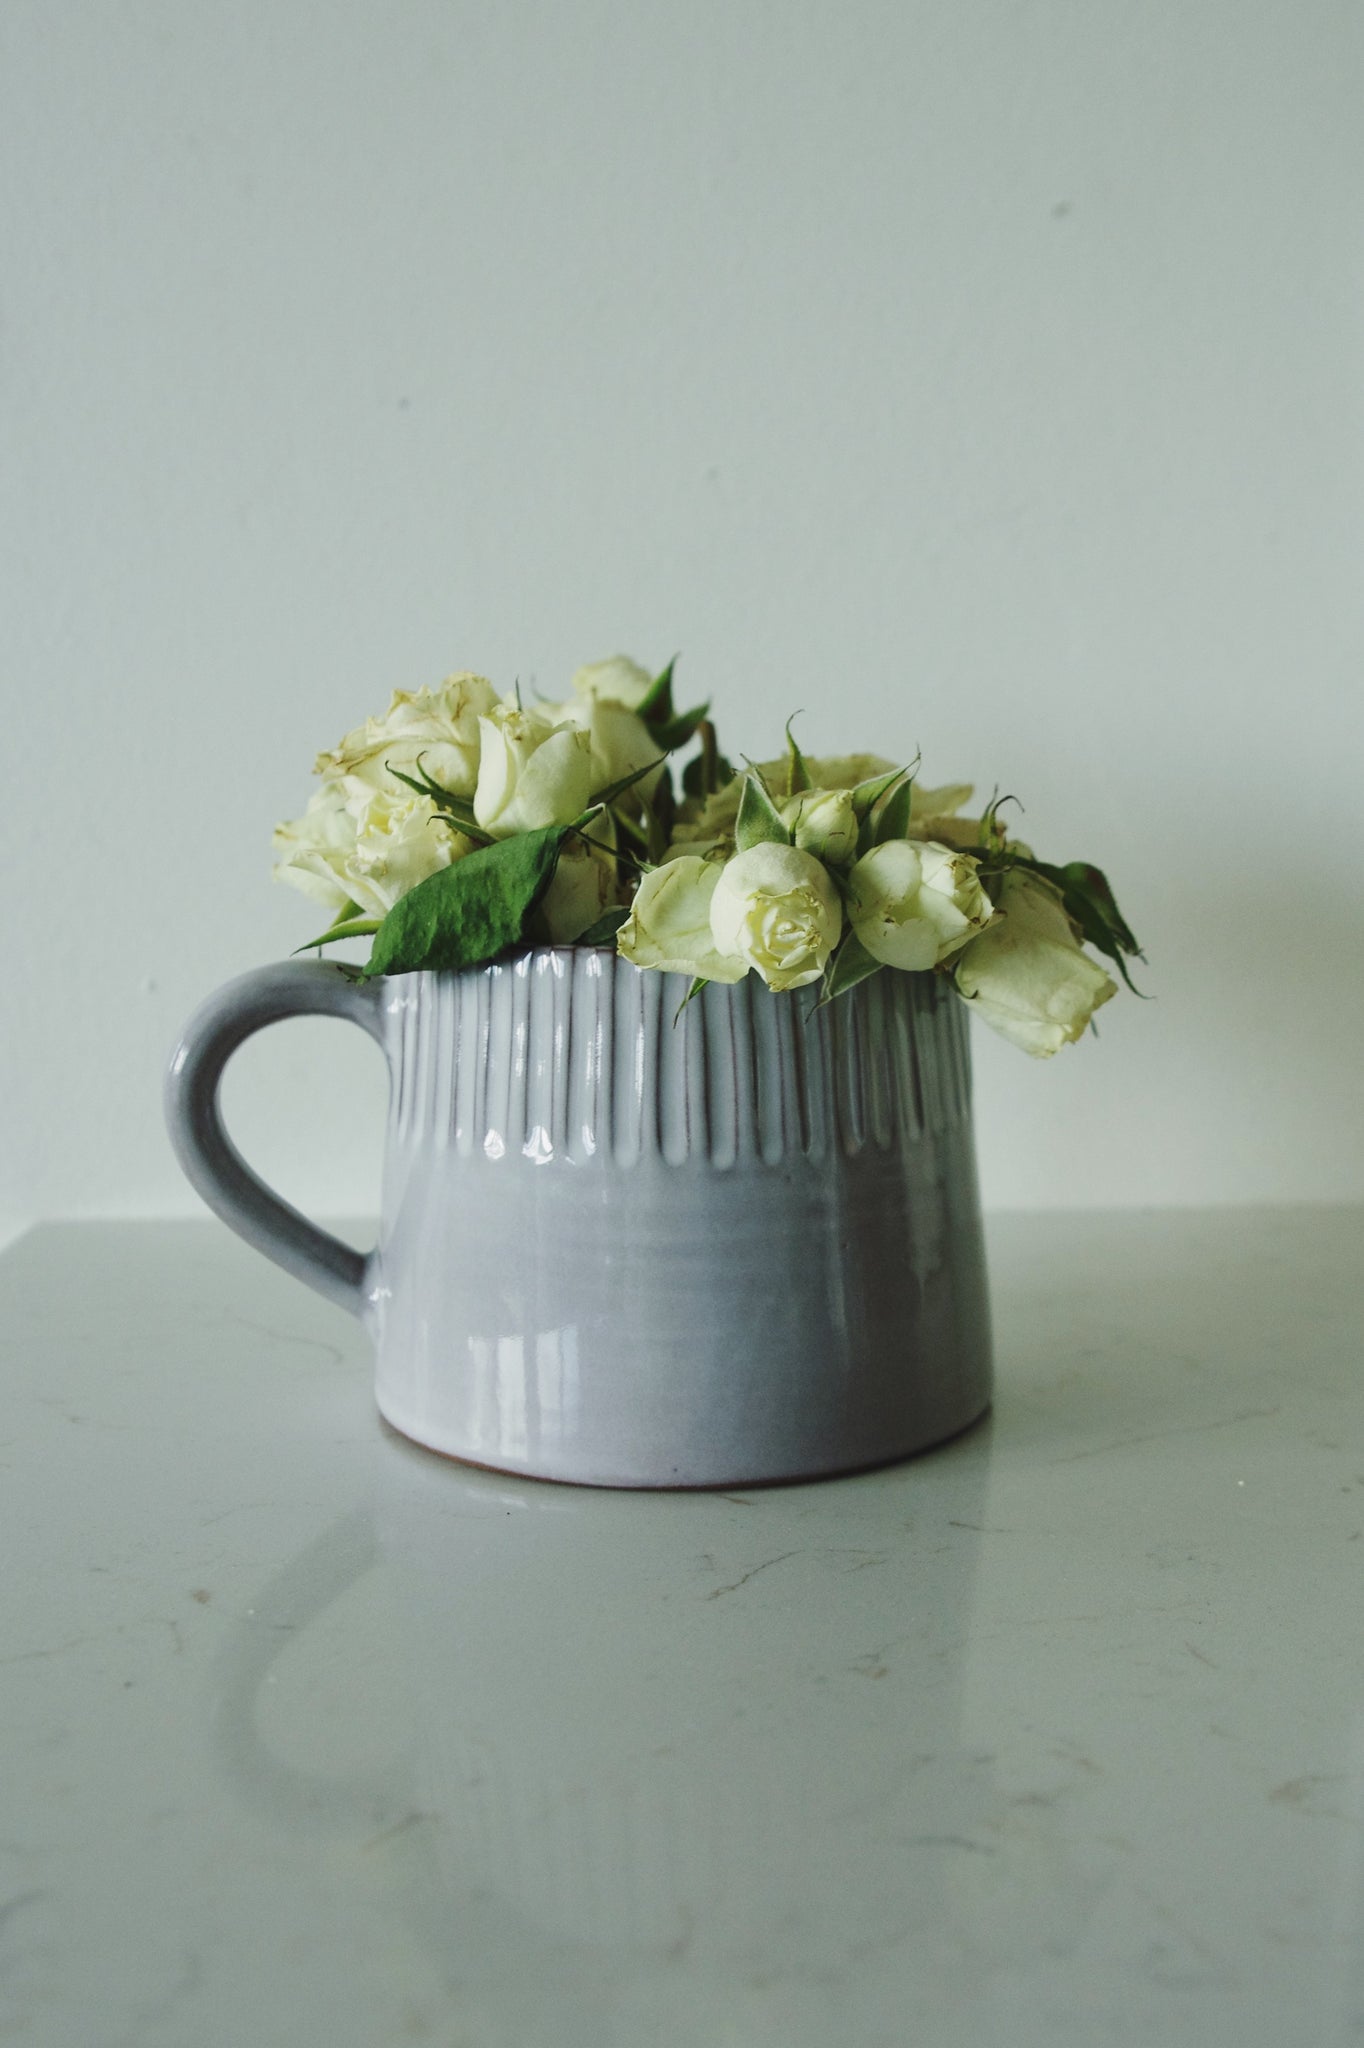 Soft grey ridged ceramic pitcher with fresh white roses on marble, against an off-white wall.